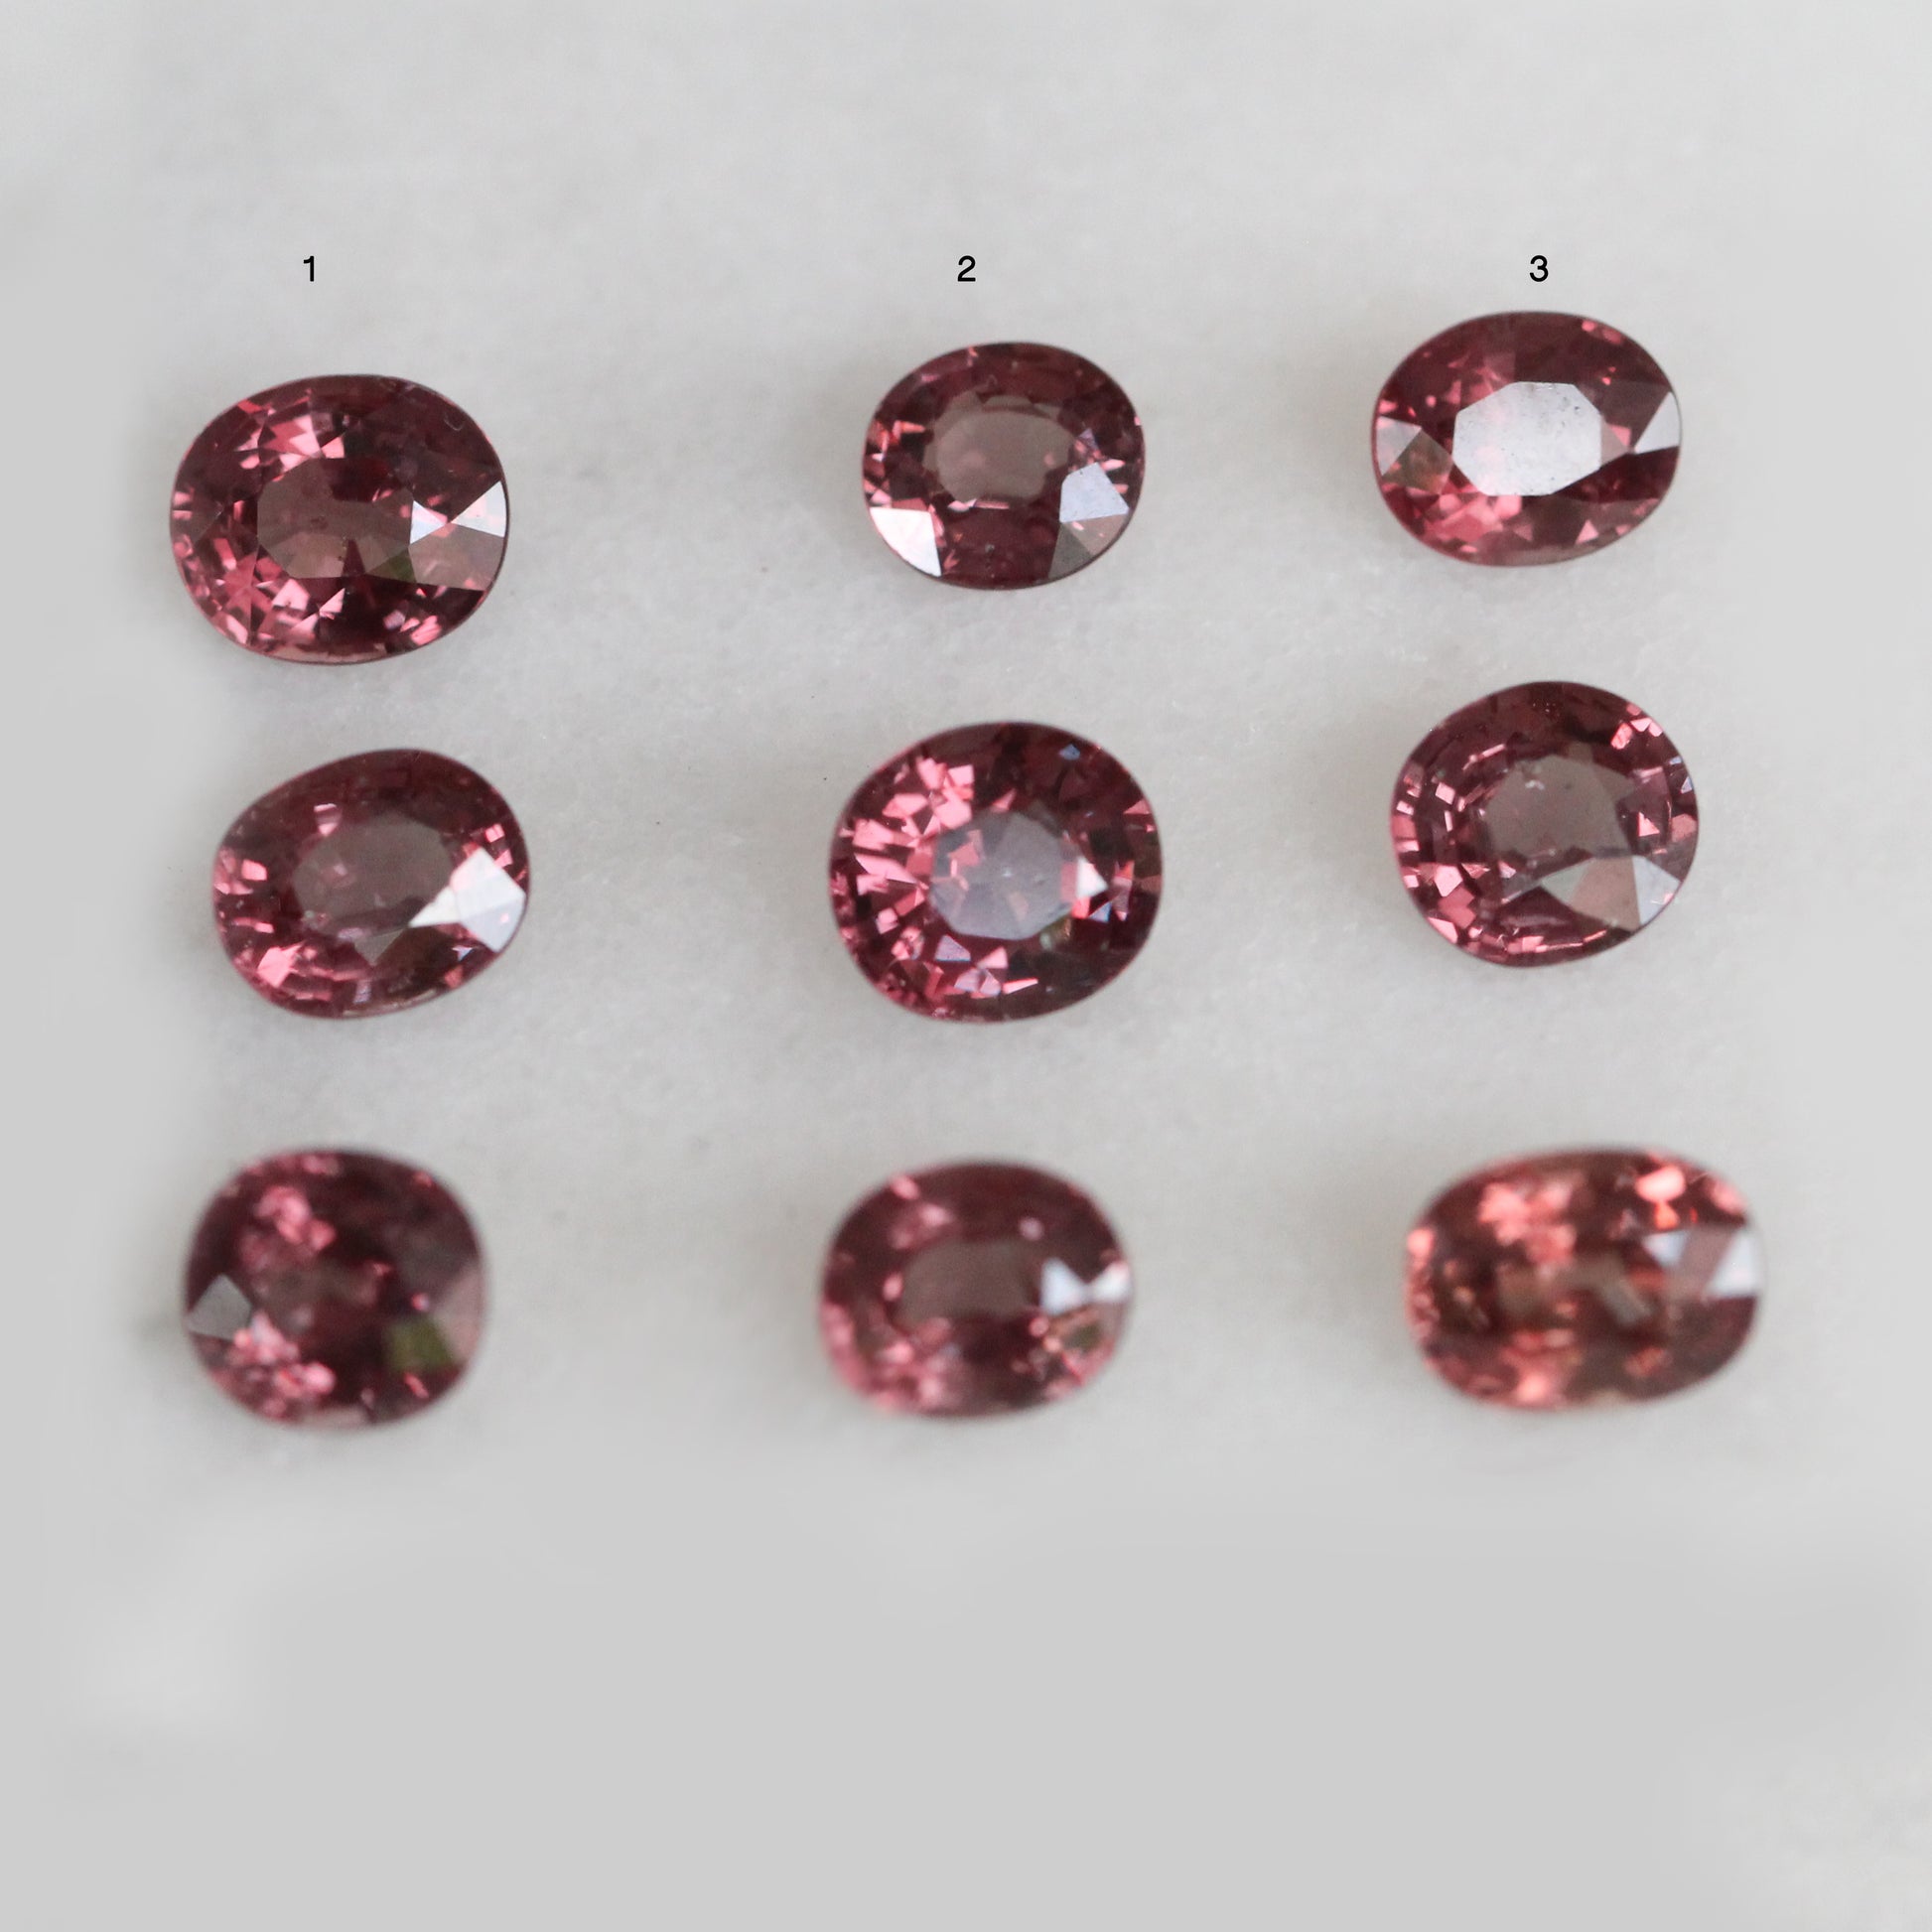 Color change Garnet oval stones to create a custom ring - Pick yours! - Inventory for custom work - Midwinter Co. Alternative Bridal Rings and Modern Fine Jewelry